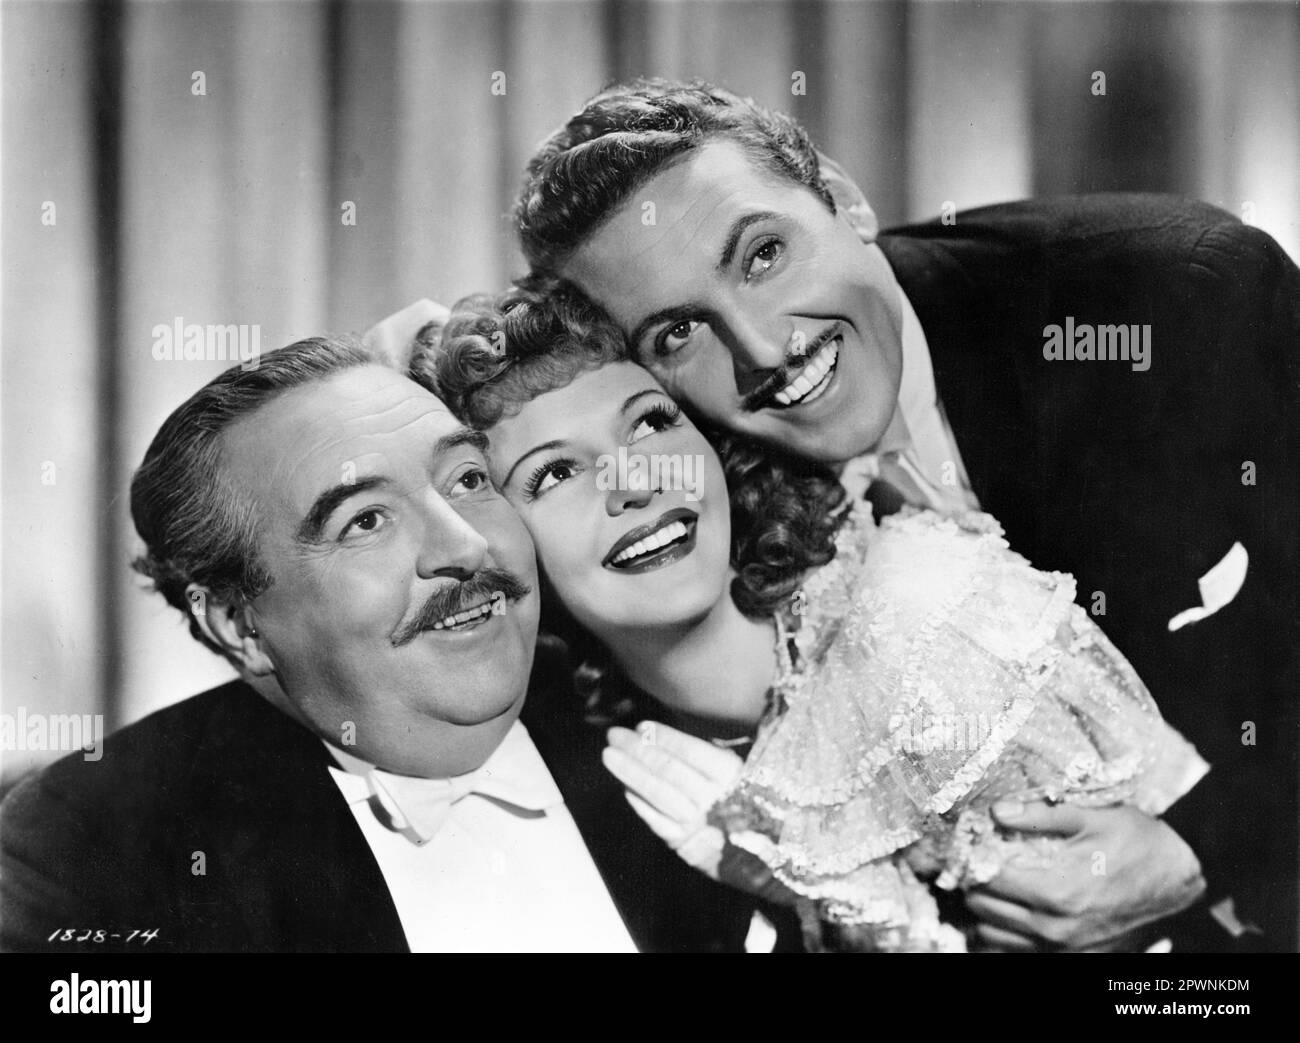 WALTER CONNOLLY as Victor Herbert MARY MARTIN and ALLAN JONES Portrait in THE GREAT VICTOR HERBERT 1939 director ANDREW L. STONE costume design Edith Head Paramount Pictures Stock Photo